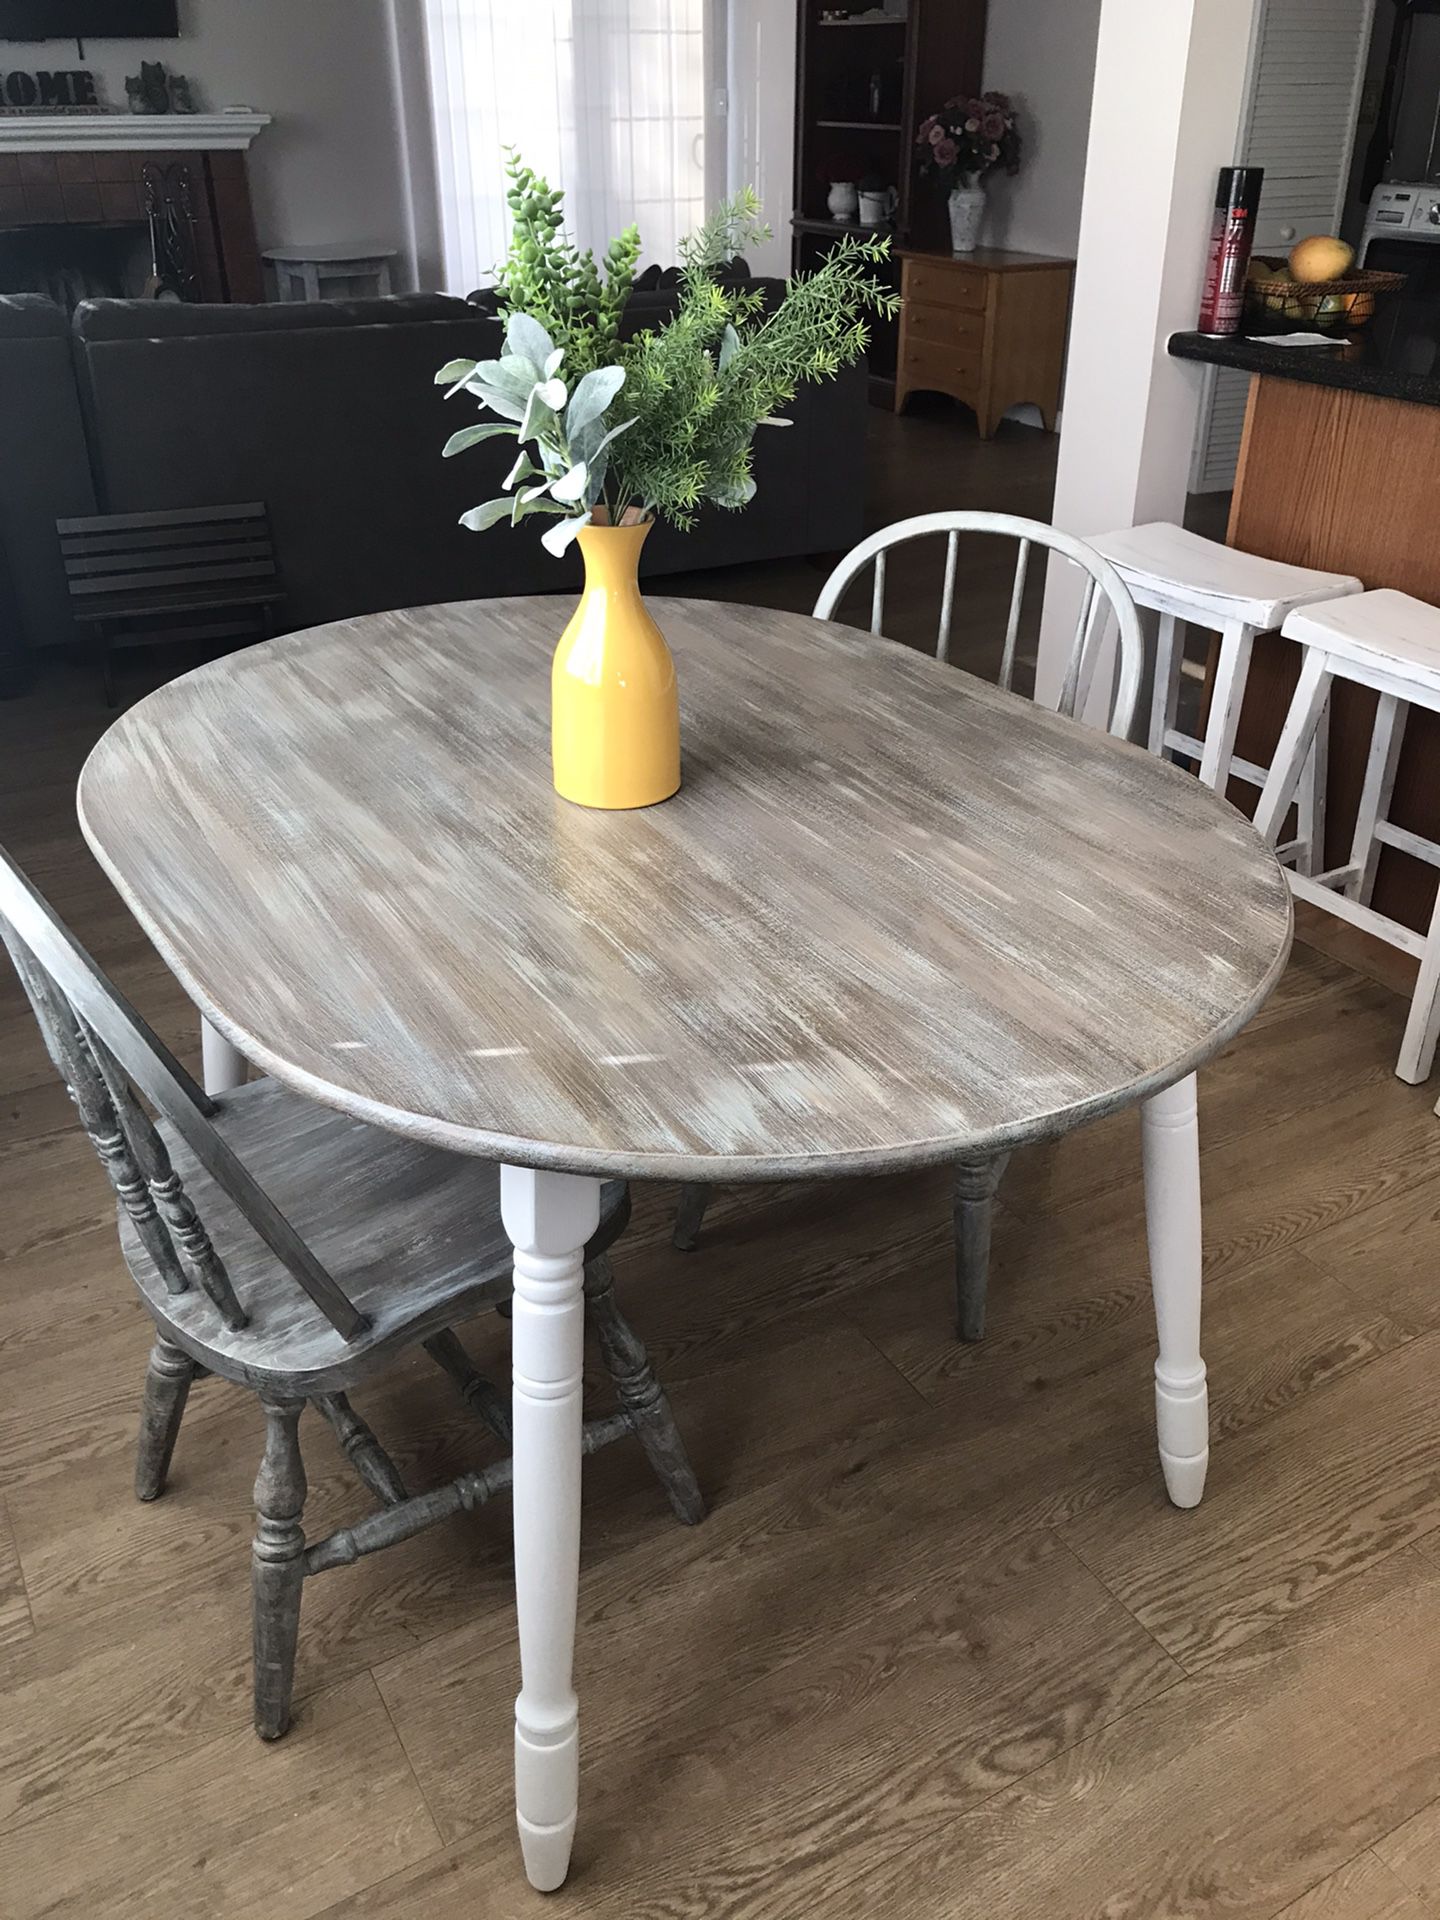 Farmhouse solid wood dining table set . One of the kind Unique (table for two ) Table and two Chairs